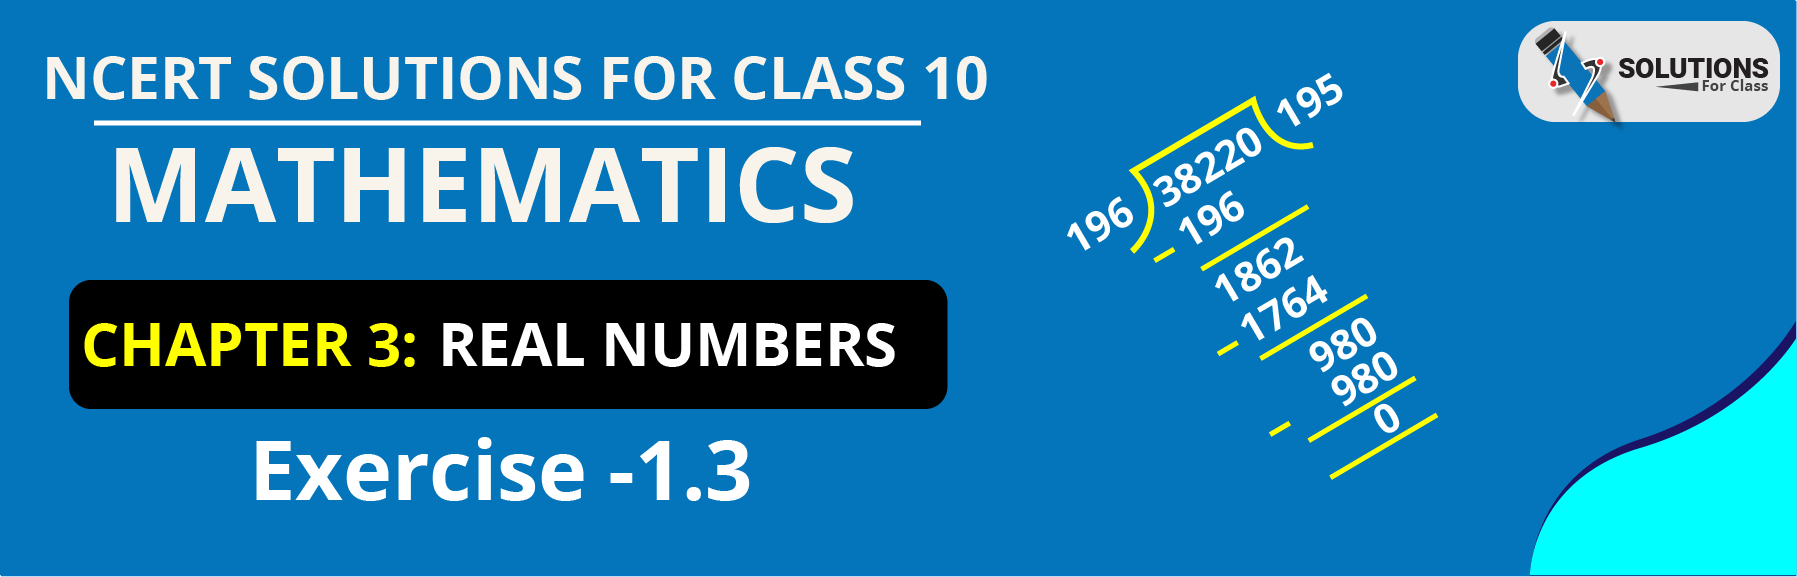 NCERT Solutions For Class 10, Maths, Chapter 1, Real Numbers, Exercise 1.3